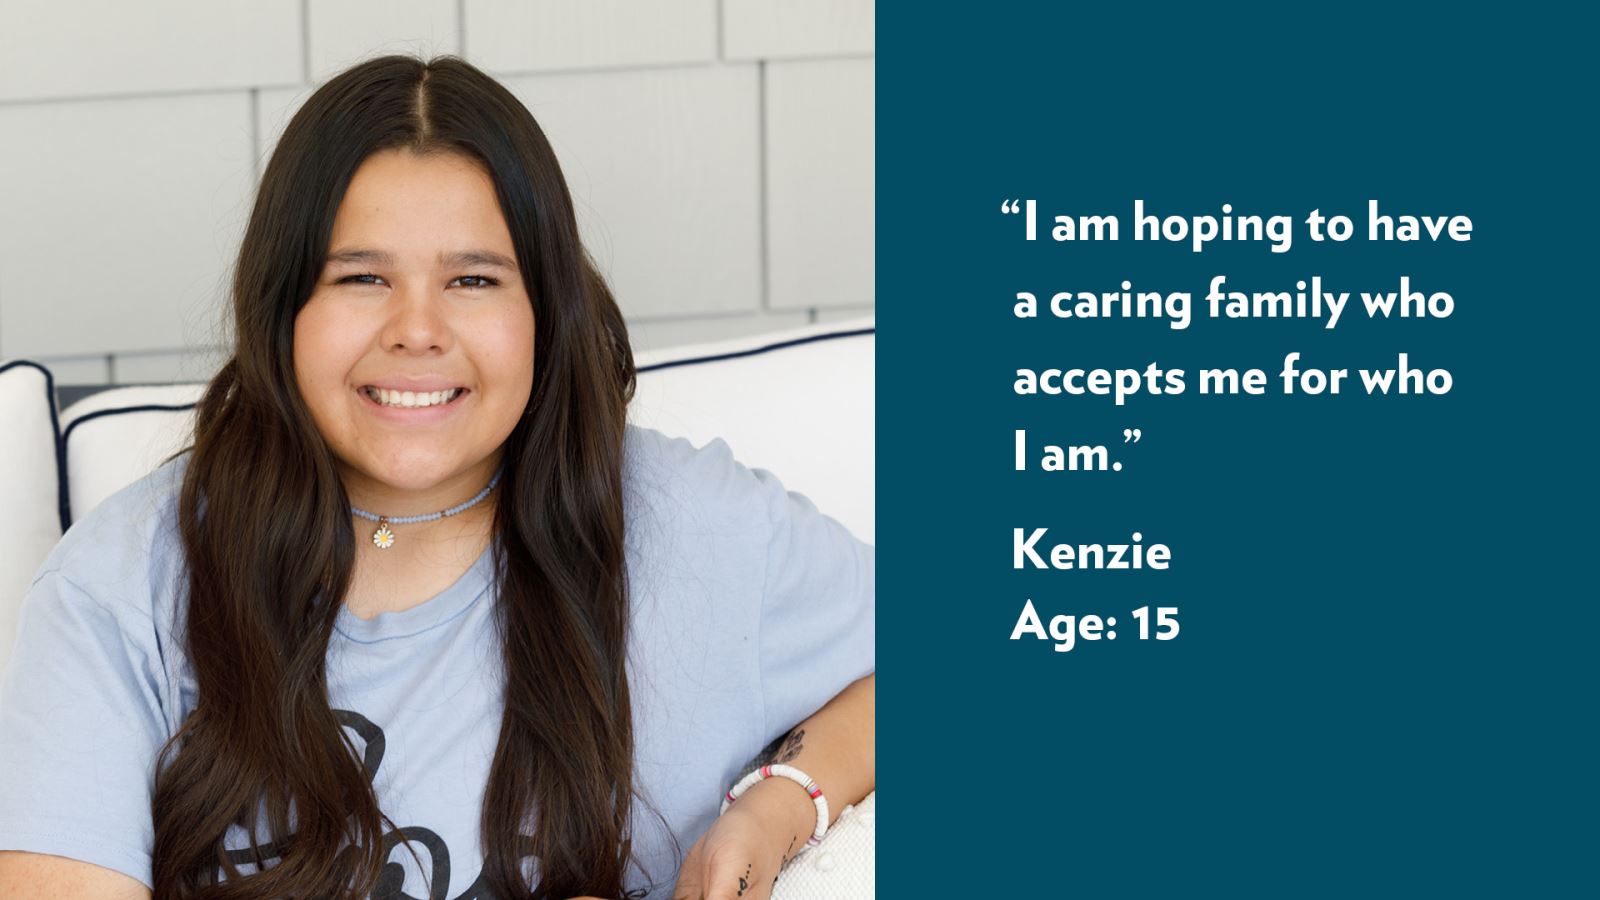 I am hoping to have a caring family who accepts me for who I am. Kenzie, age 15.